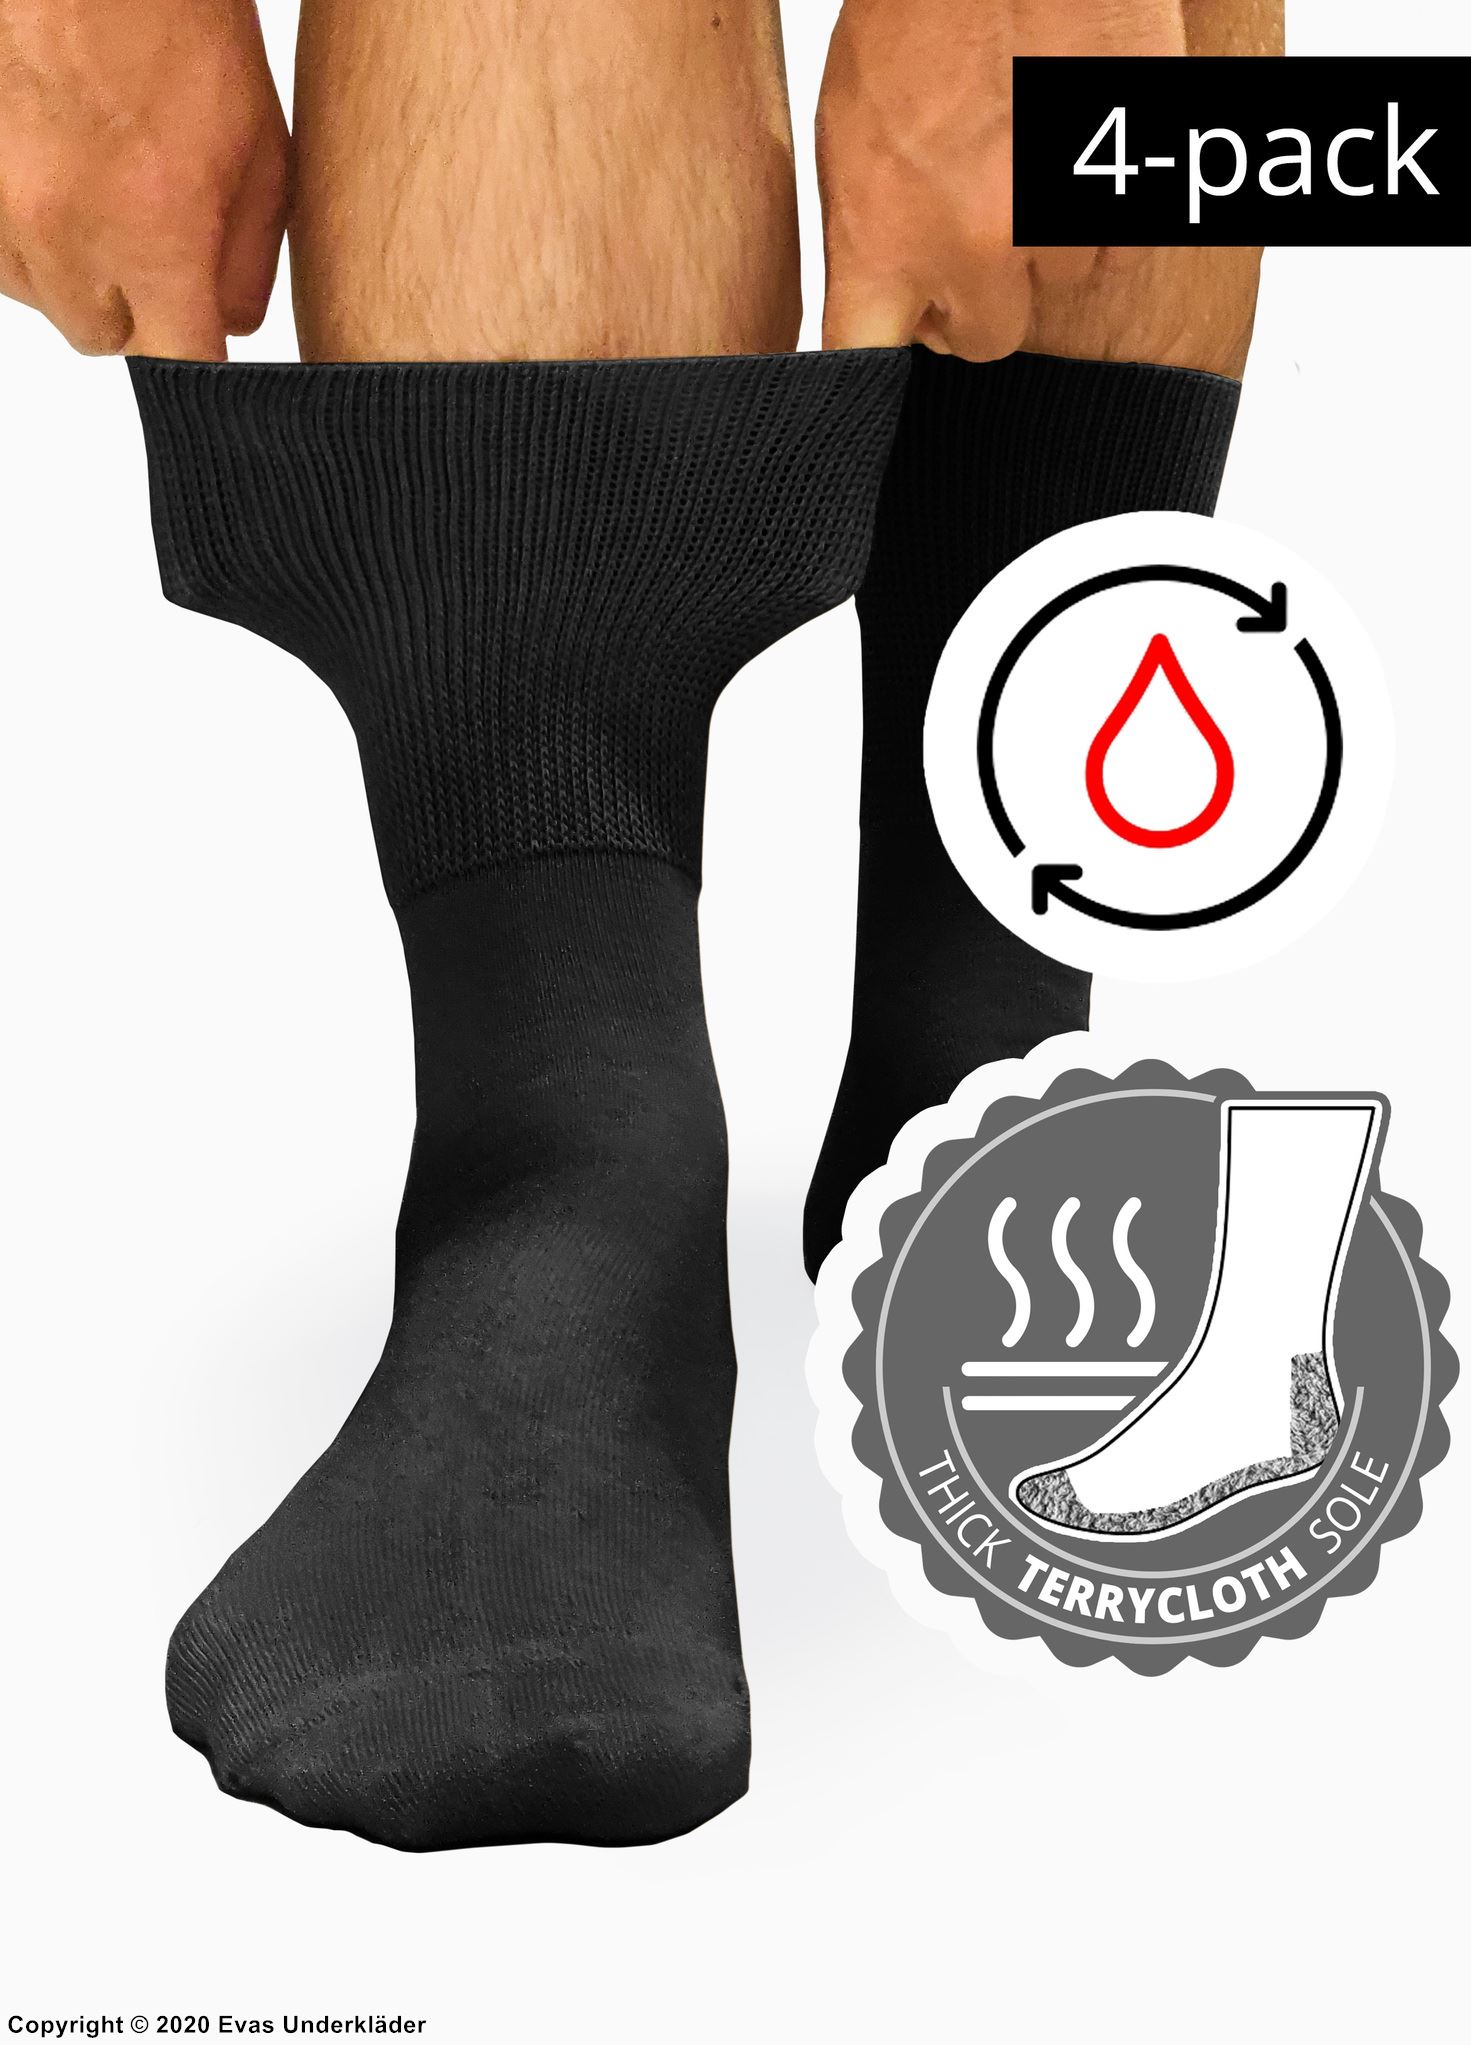 Warm comfort socks (unisex), gentle cuffs, very high quality, thick terrycloth soles, 4-pack